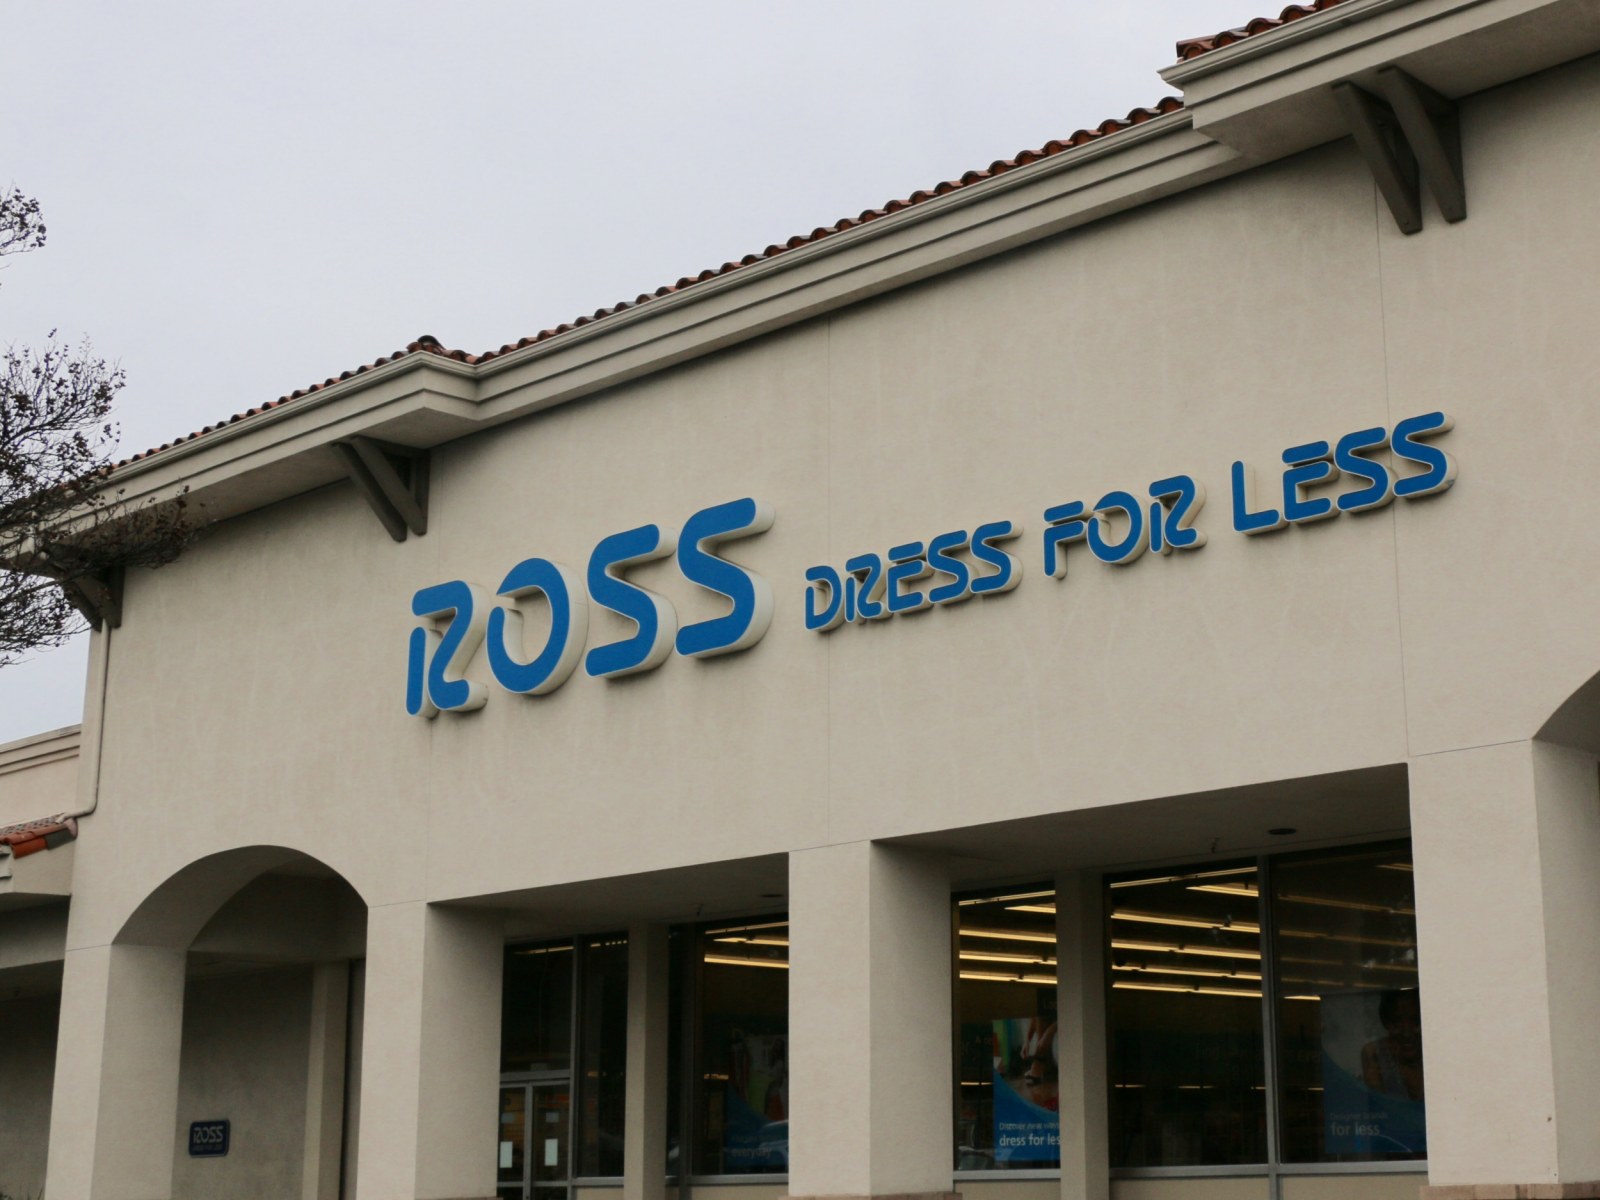 [View 44+] Ross Dress For Less Near Me